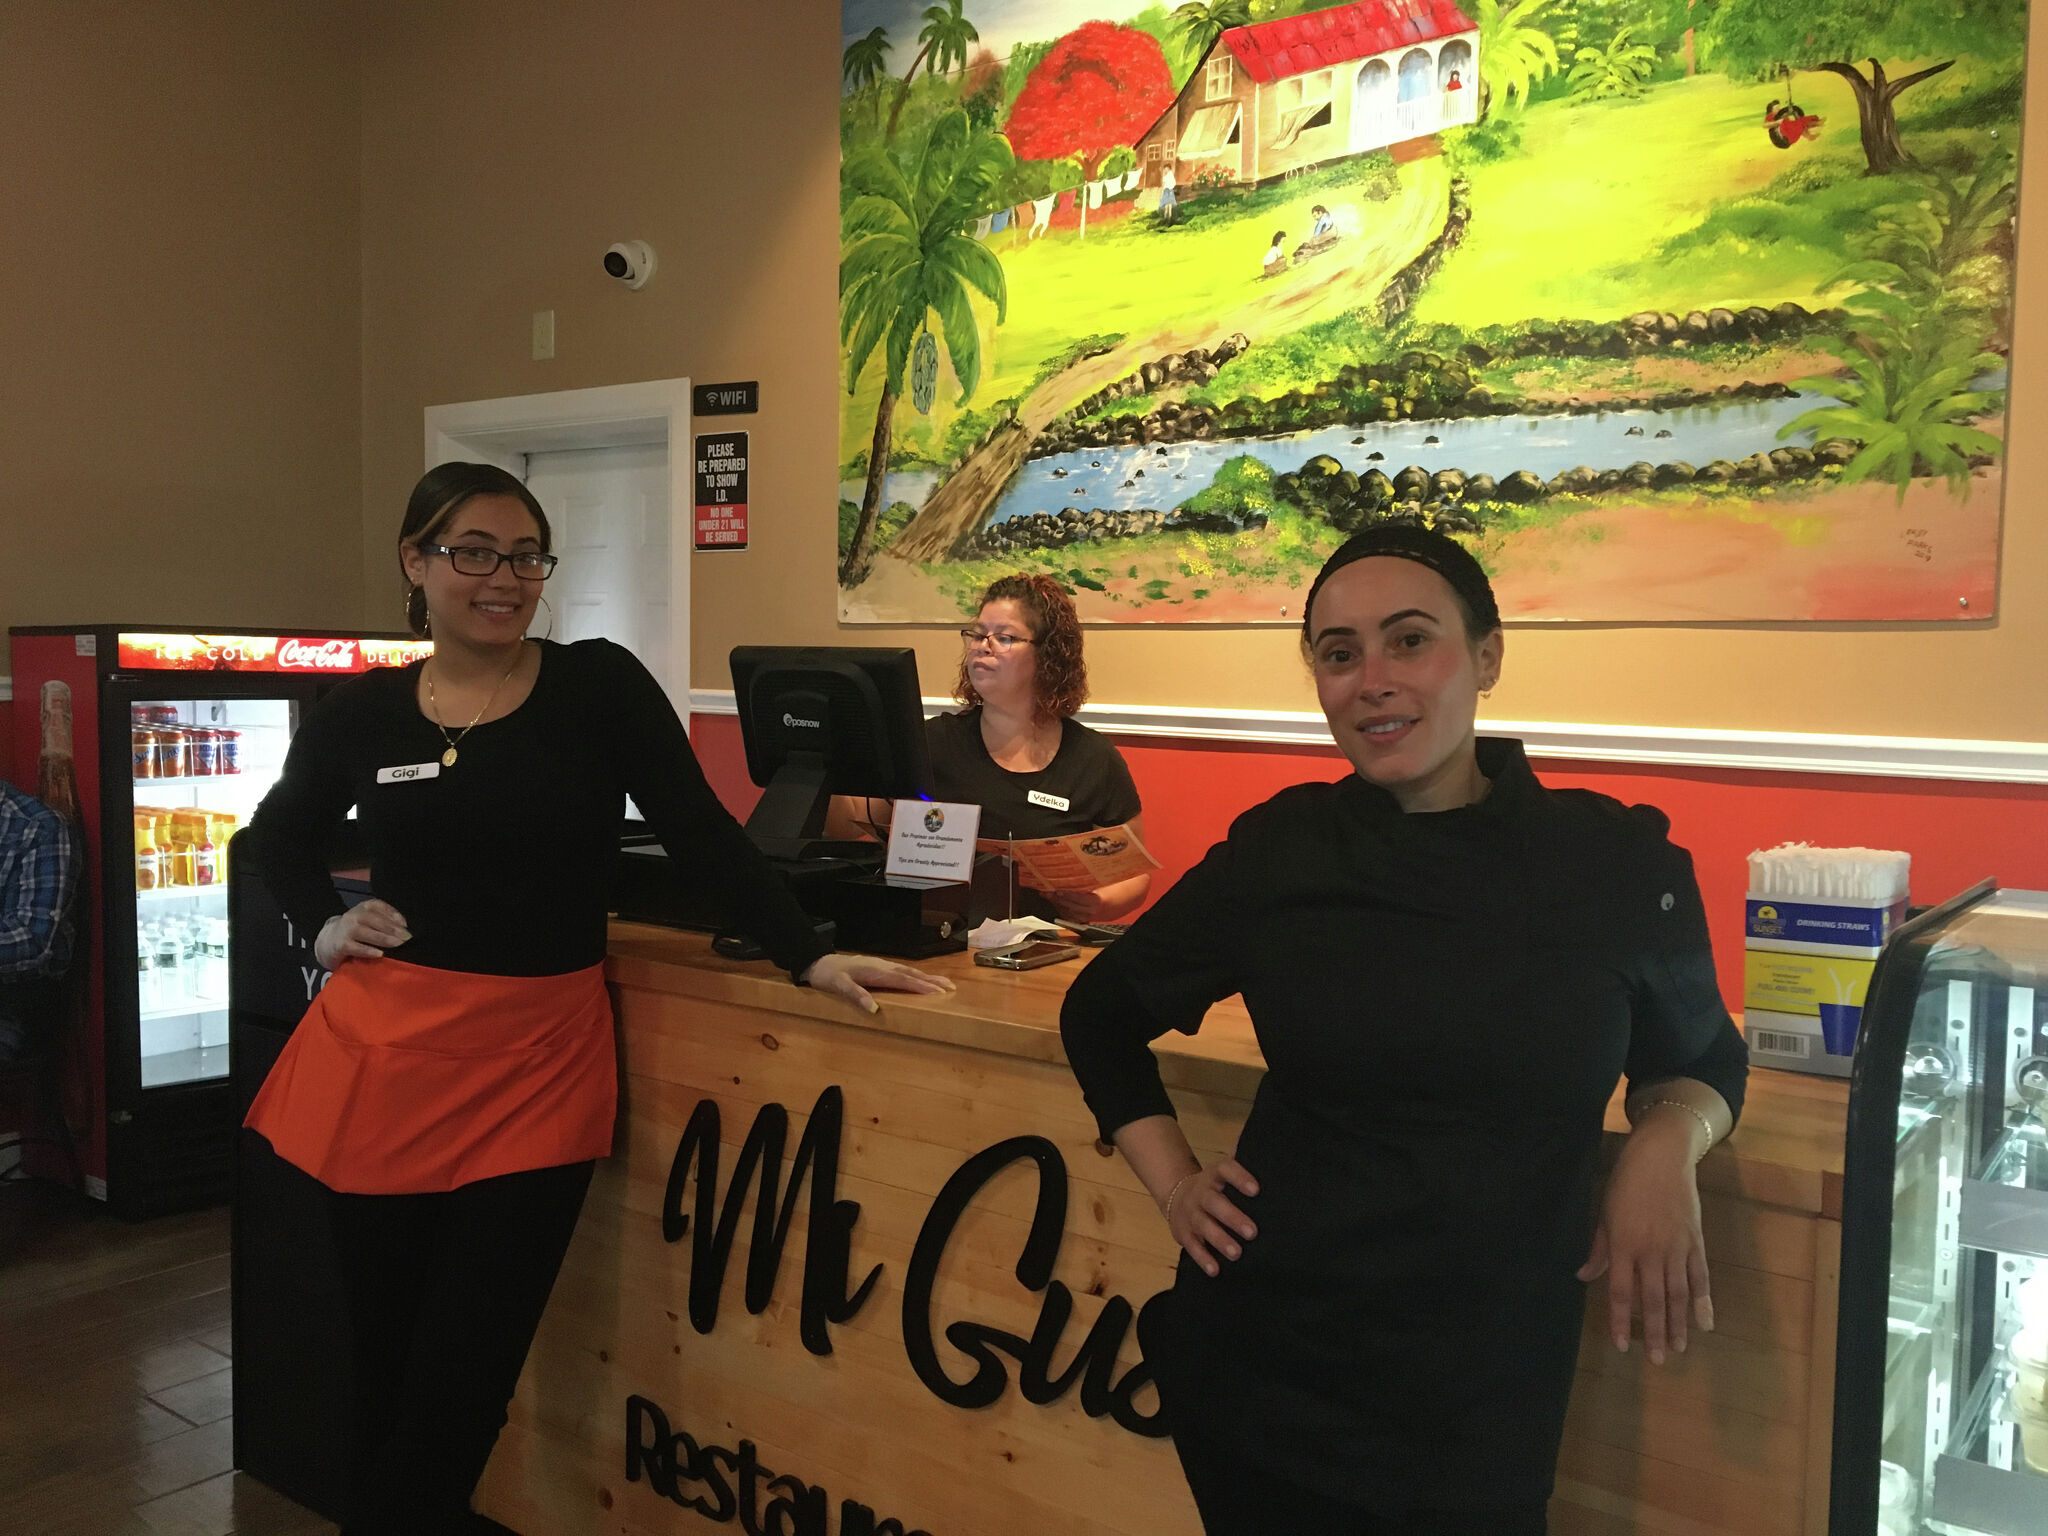 Mi Gusto finally opens to serve Latin Caribbean fare at one of New Haven's hottest corners